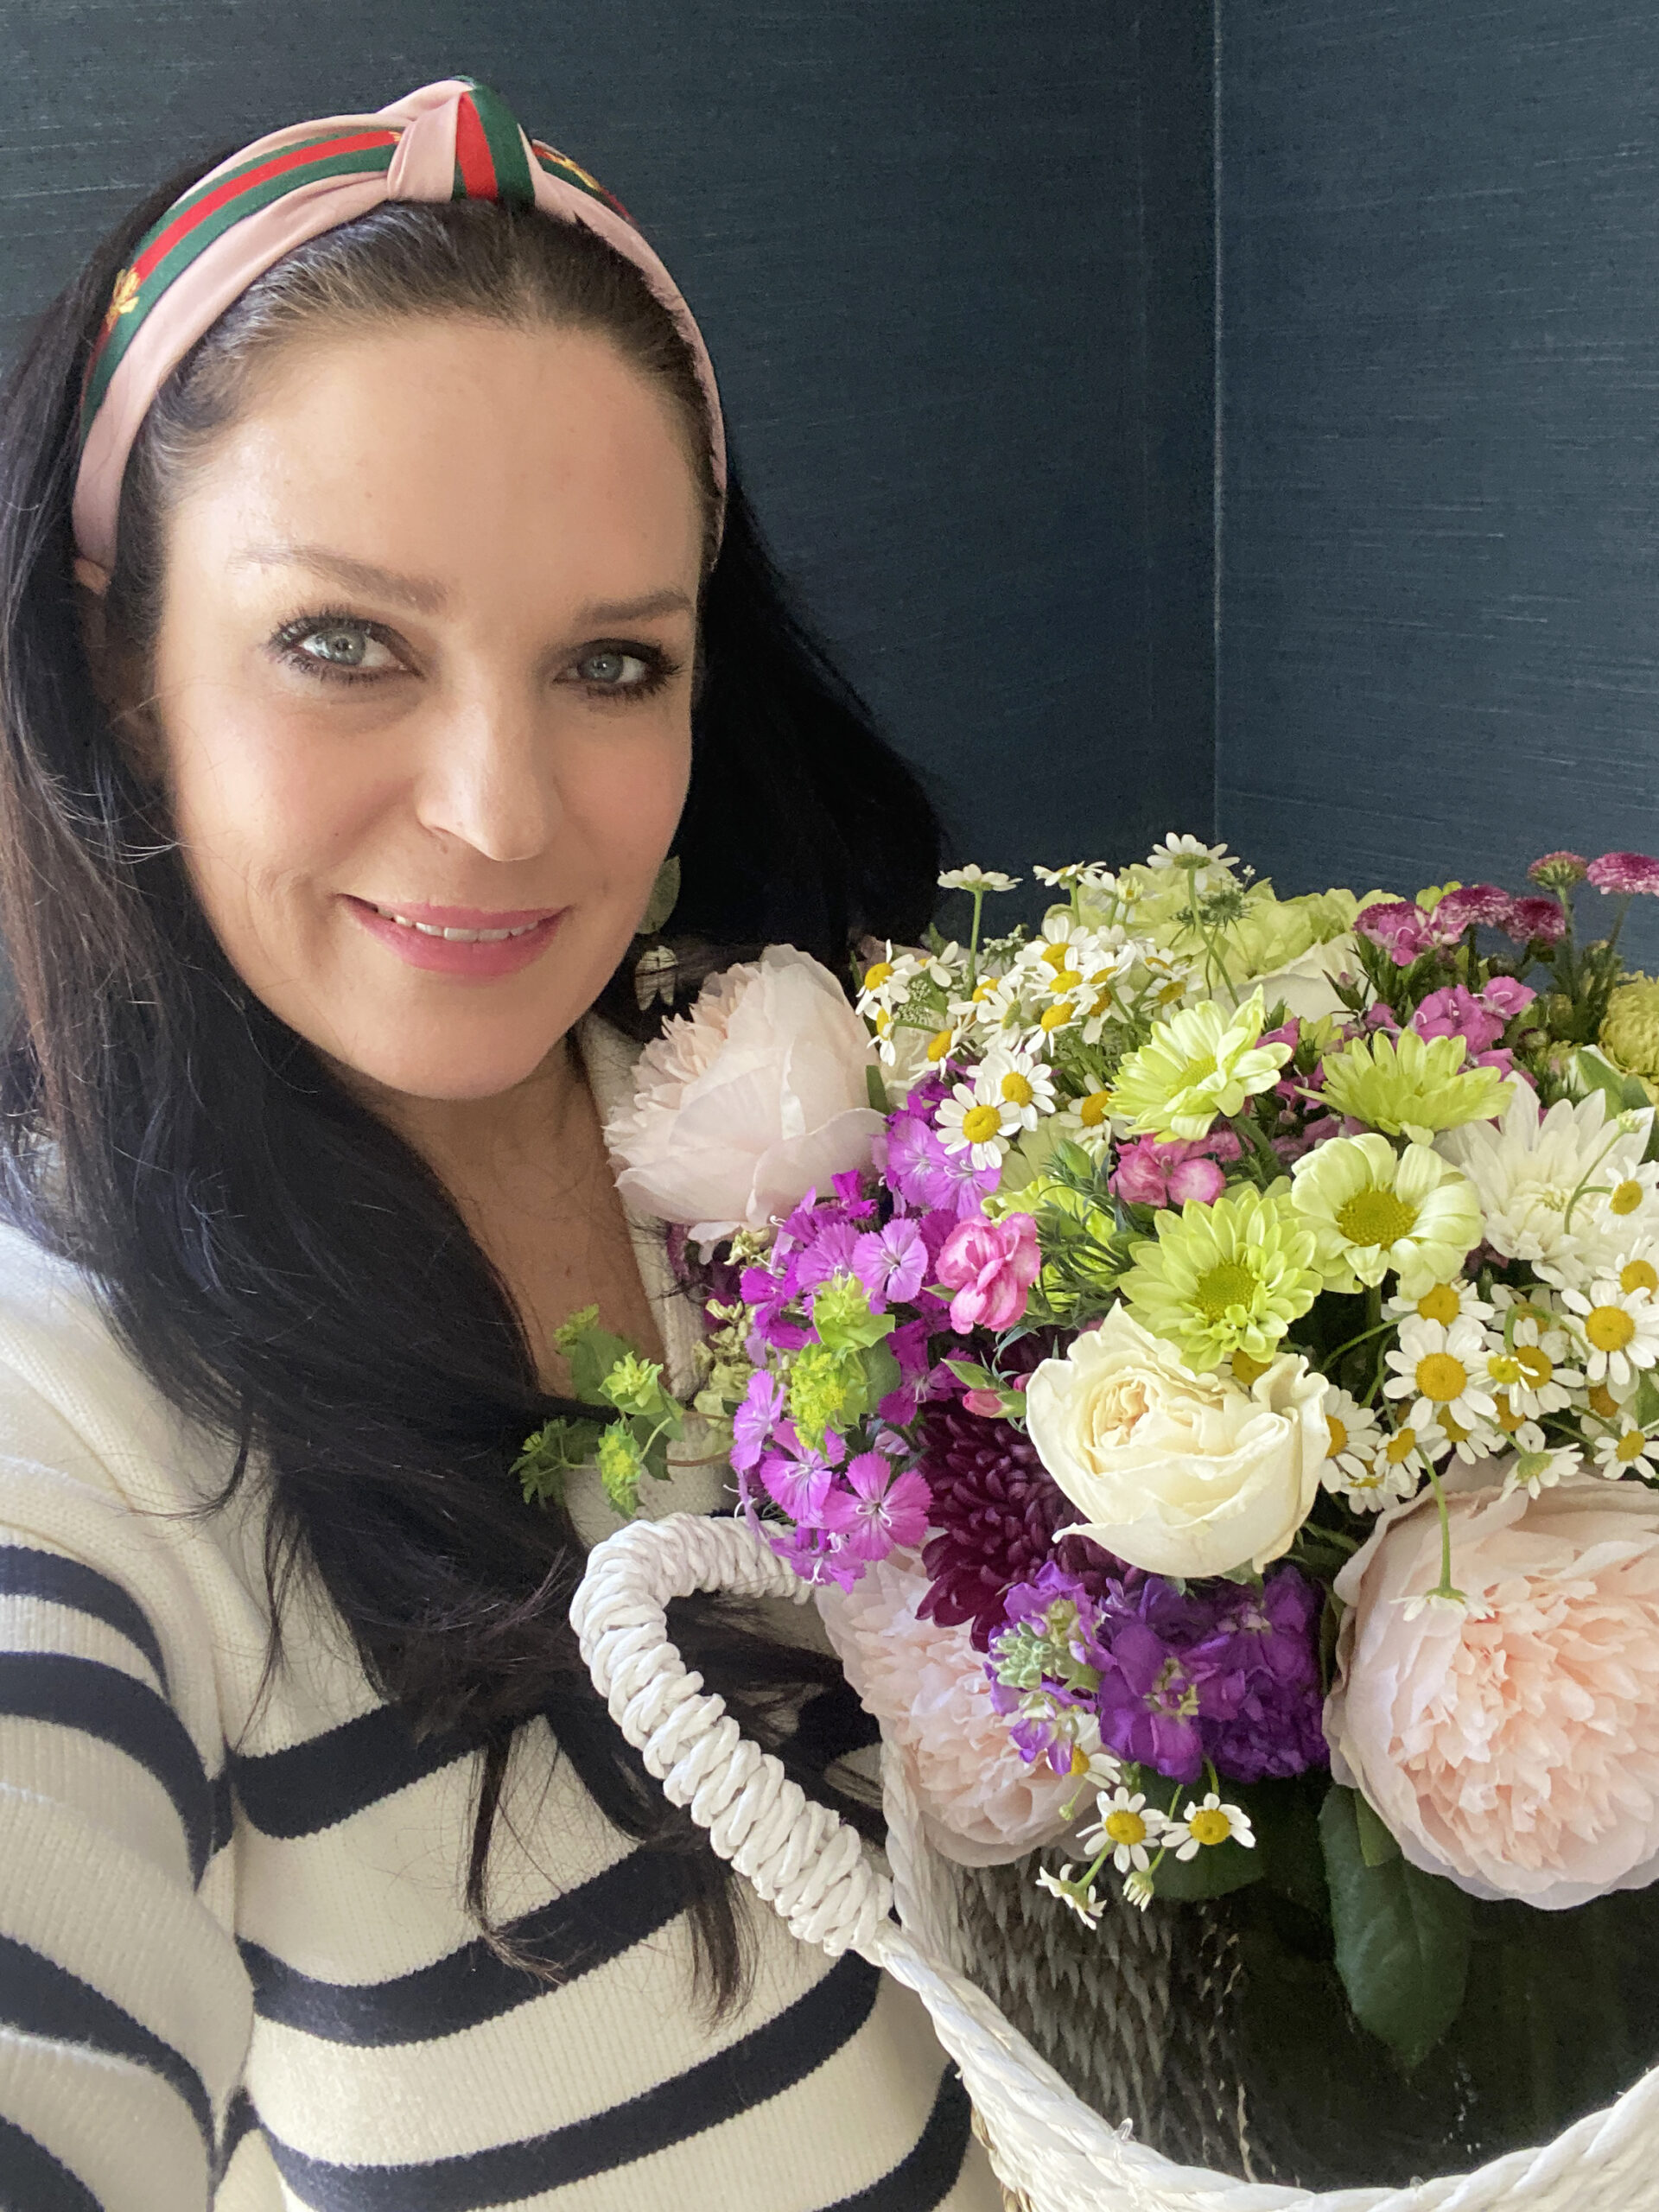 Put your Cut Flowers in a Basket for a Spring Look that you can use for a spring party celebration for smaller baskets for an Easter table space. || Darling Darleen Top Lifestyle CT Blogger